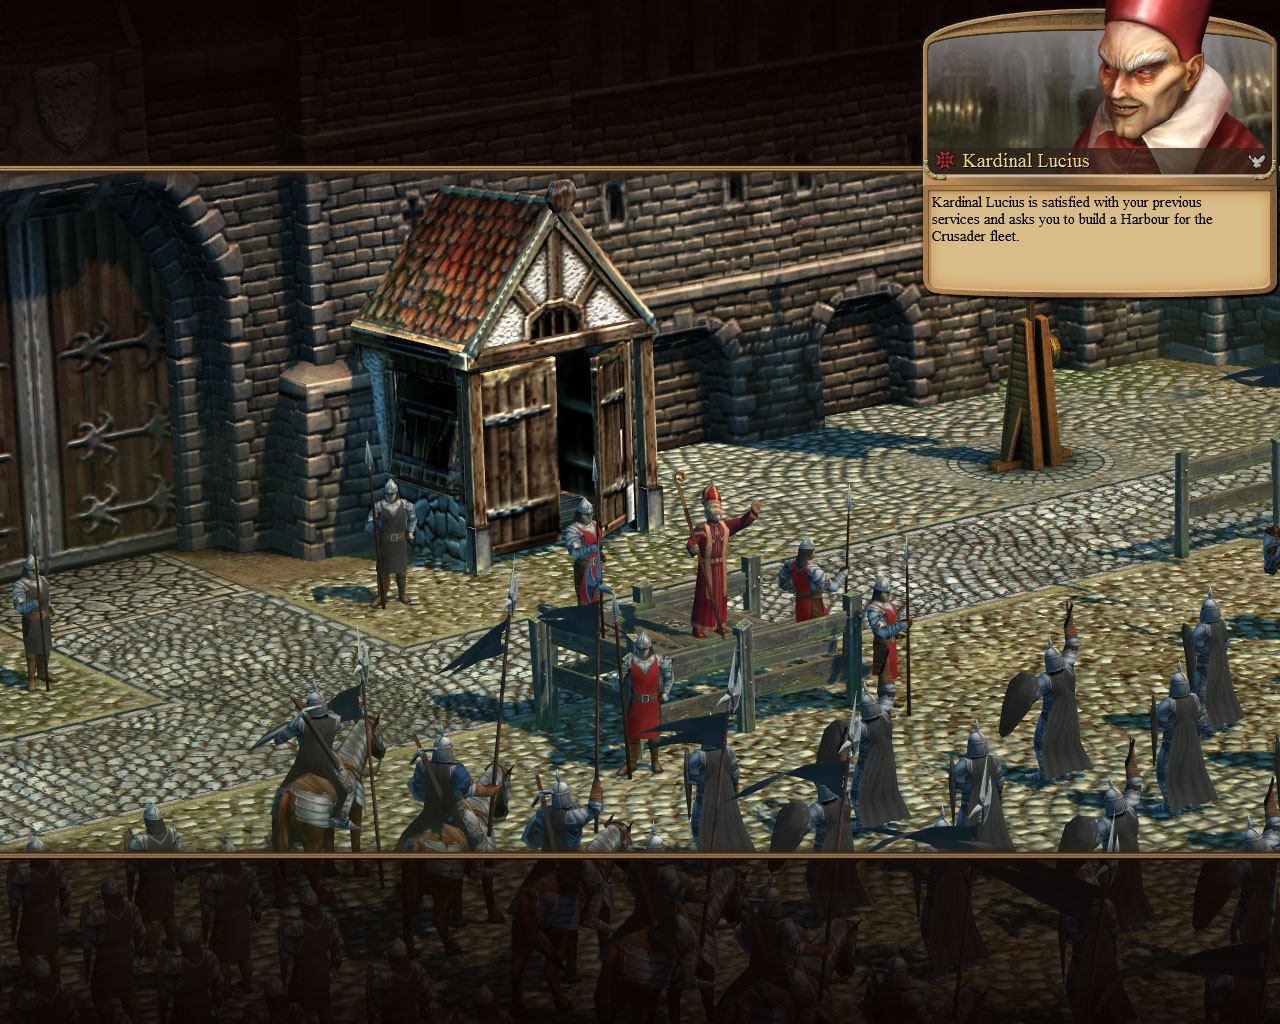 anno 1404 children disappeared from ship